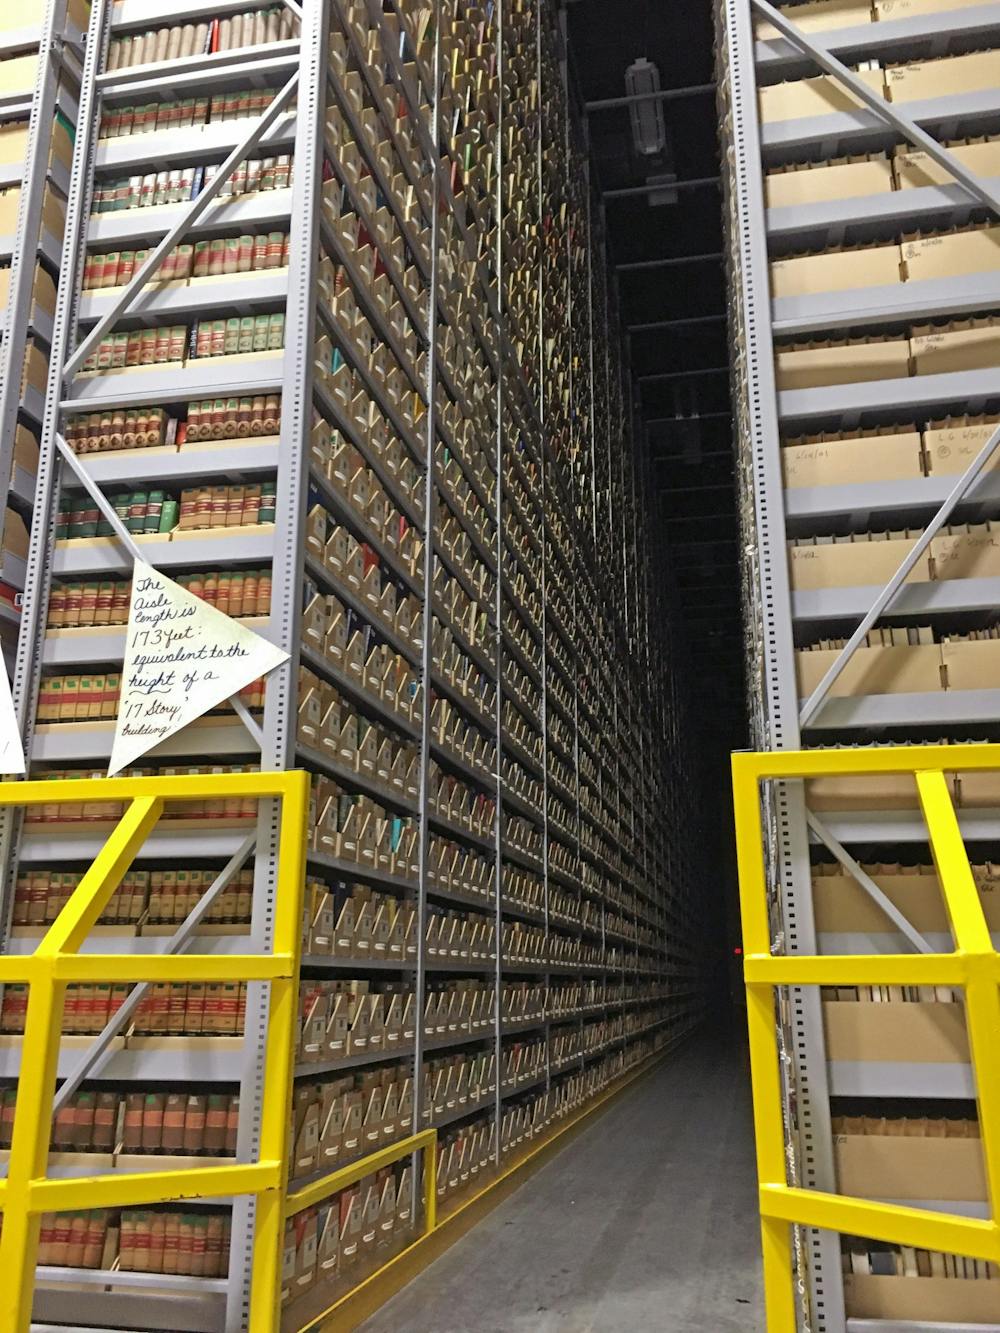 Miami sends rare books to be housed in a depository for safe keeping until they are requested again for use. 